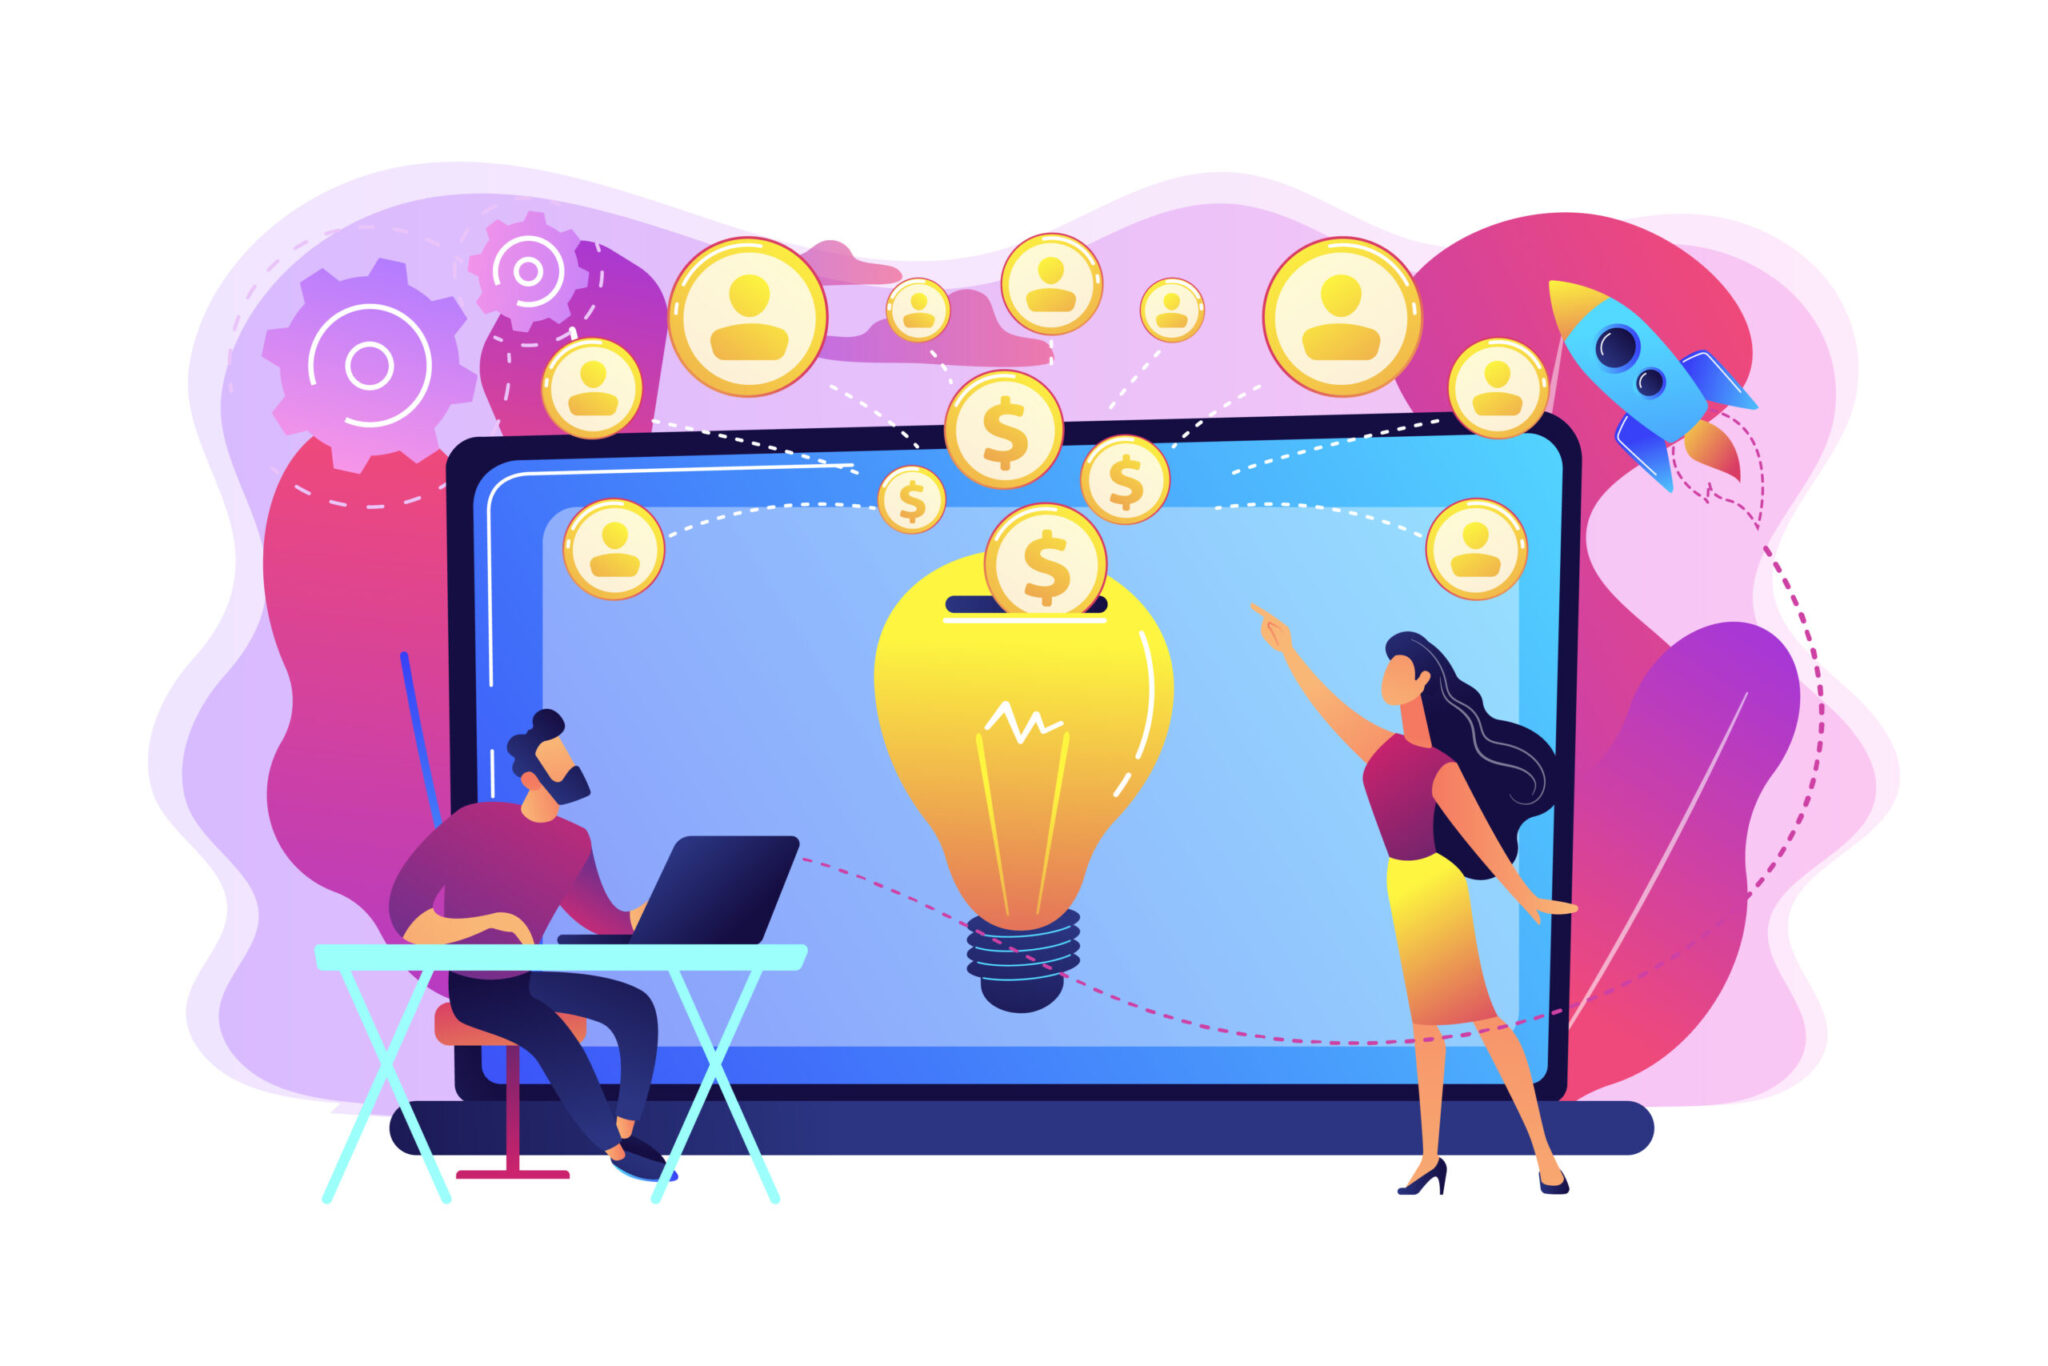 Crowdfunding concept vector illustration.